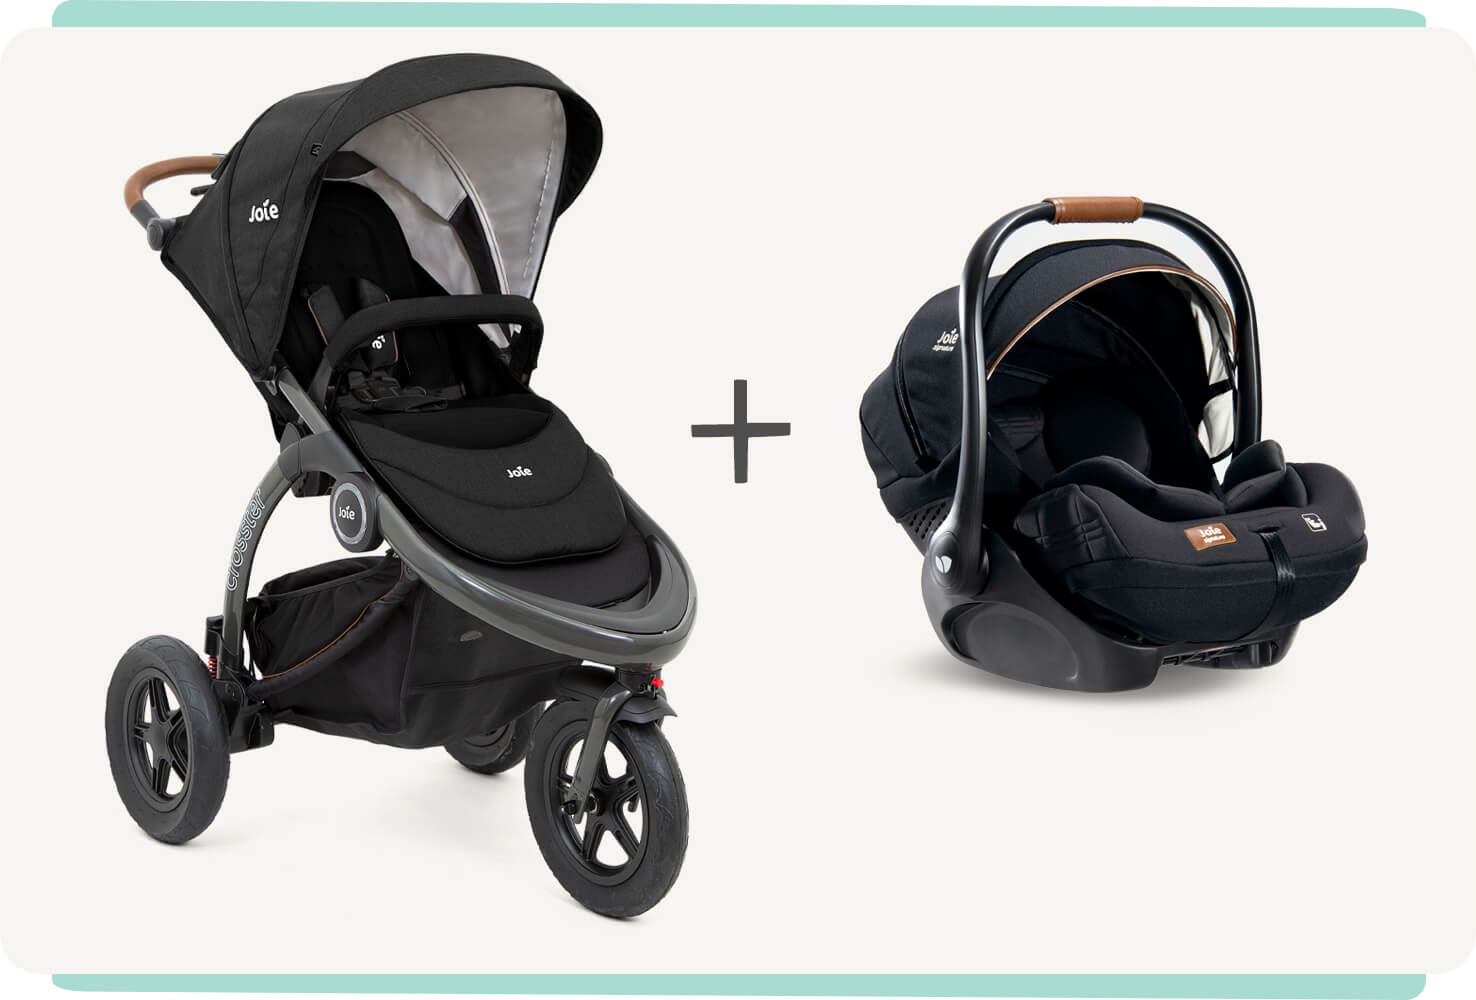 Joie Crosster in black and i-level infant carrier in black with a plus sign between them.